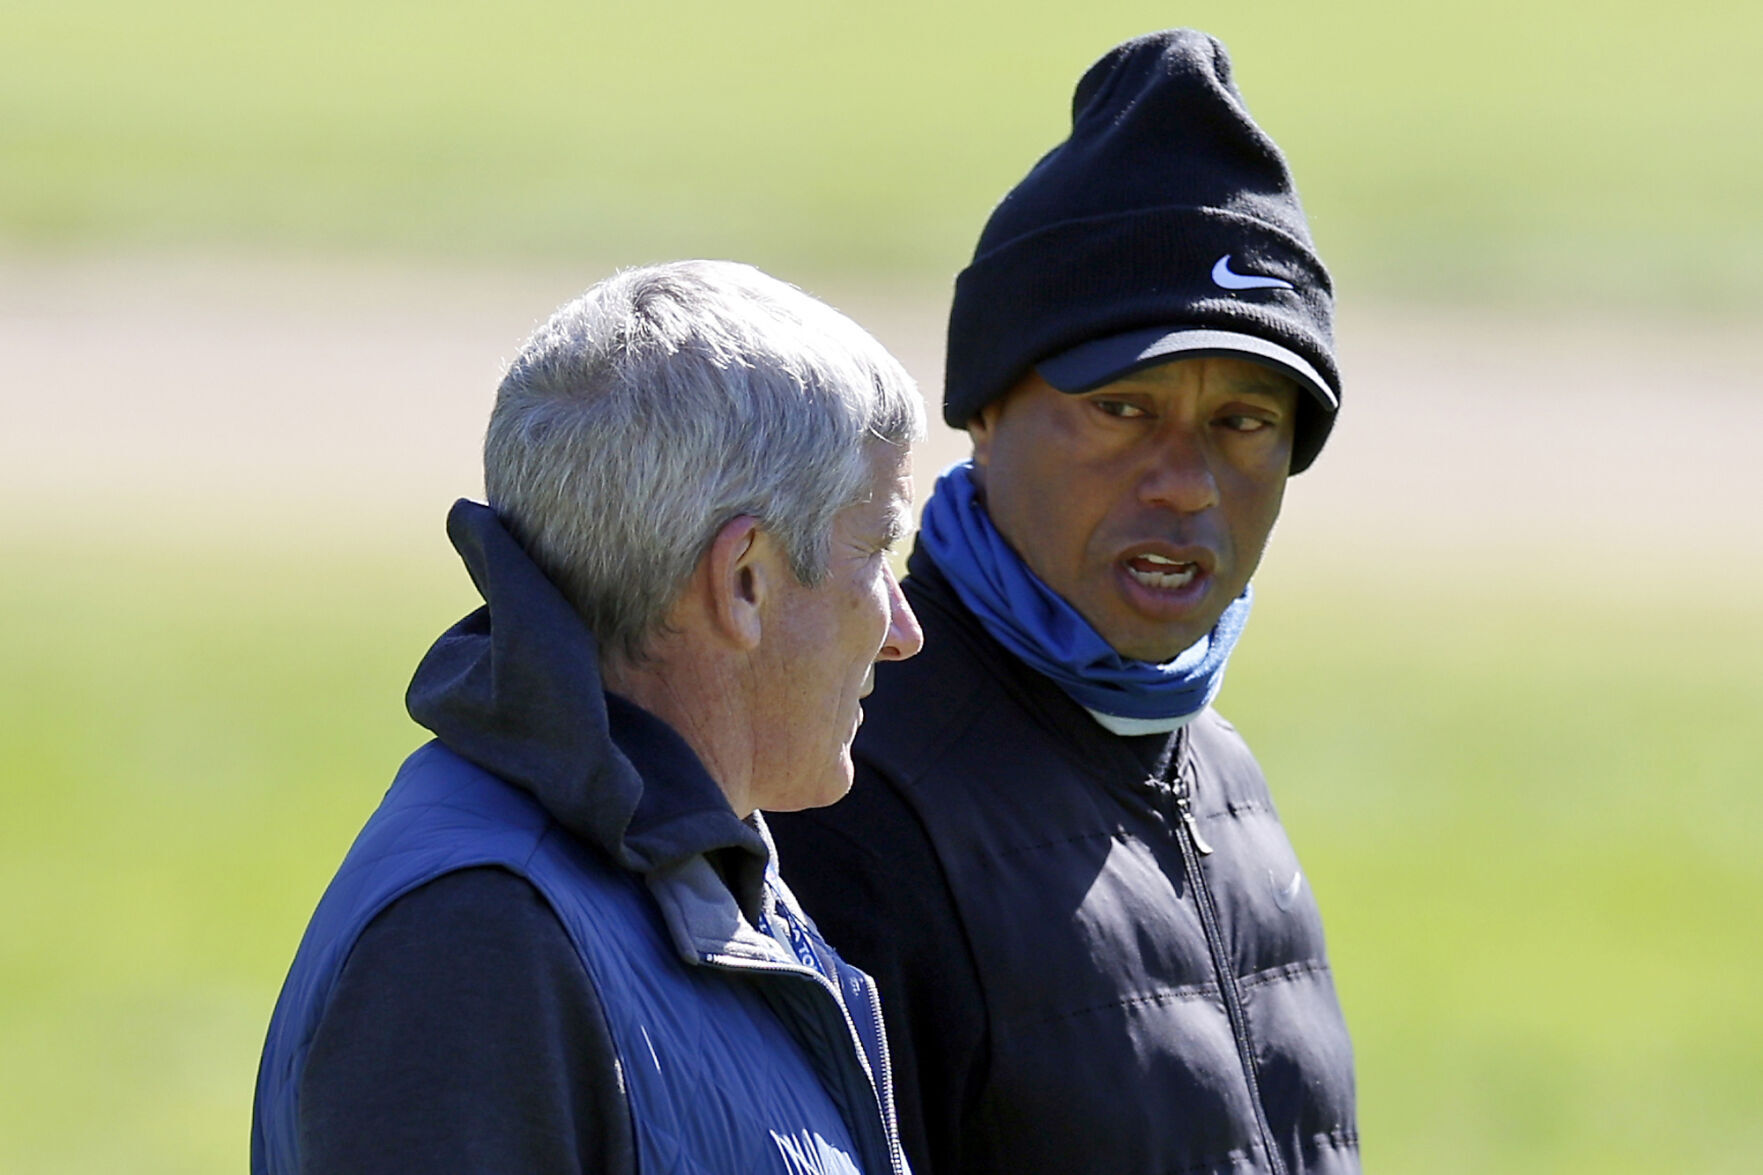 Tiger Woods had a tough time at Riviera even when healthy pic